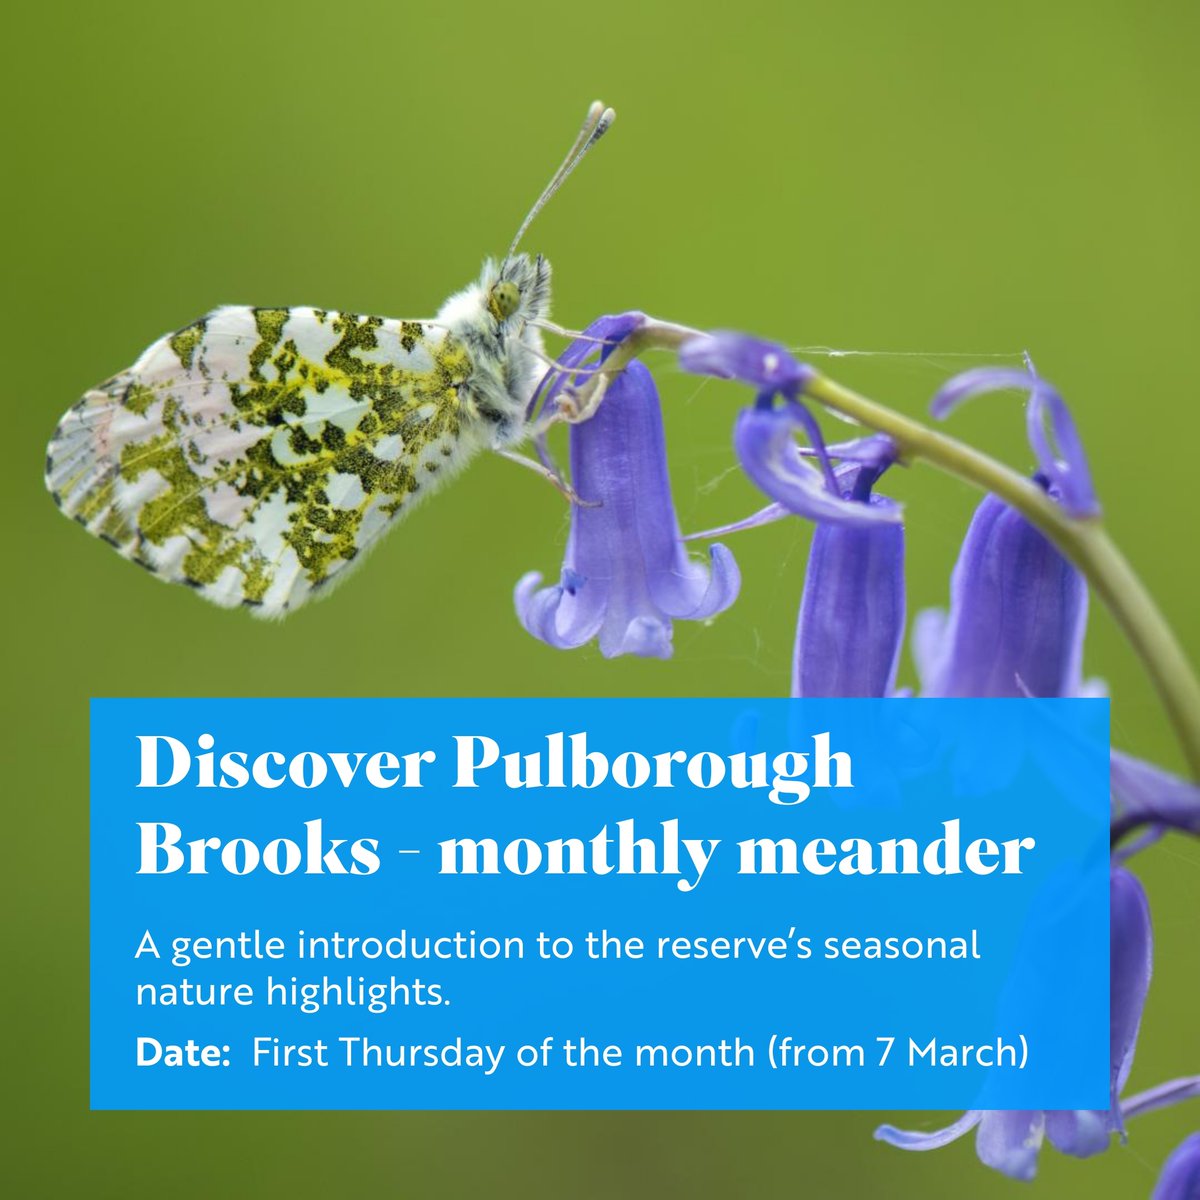 We're looking forward to our April monthly meander next Thursday (4 April) - we'll be enjoying birdsong and other signs of spring. You can book tickets in advance or pay at the welcome hut on the day (walk starts at 10.15am). Find out more: events.rspb.org.uk/events/63465